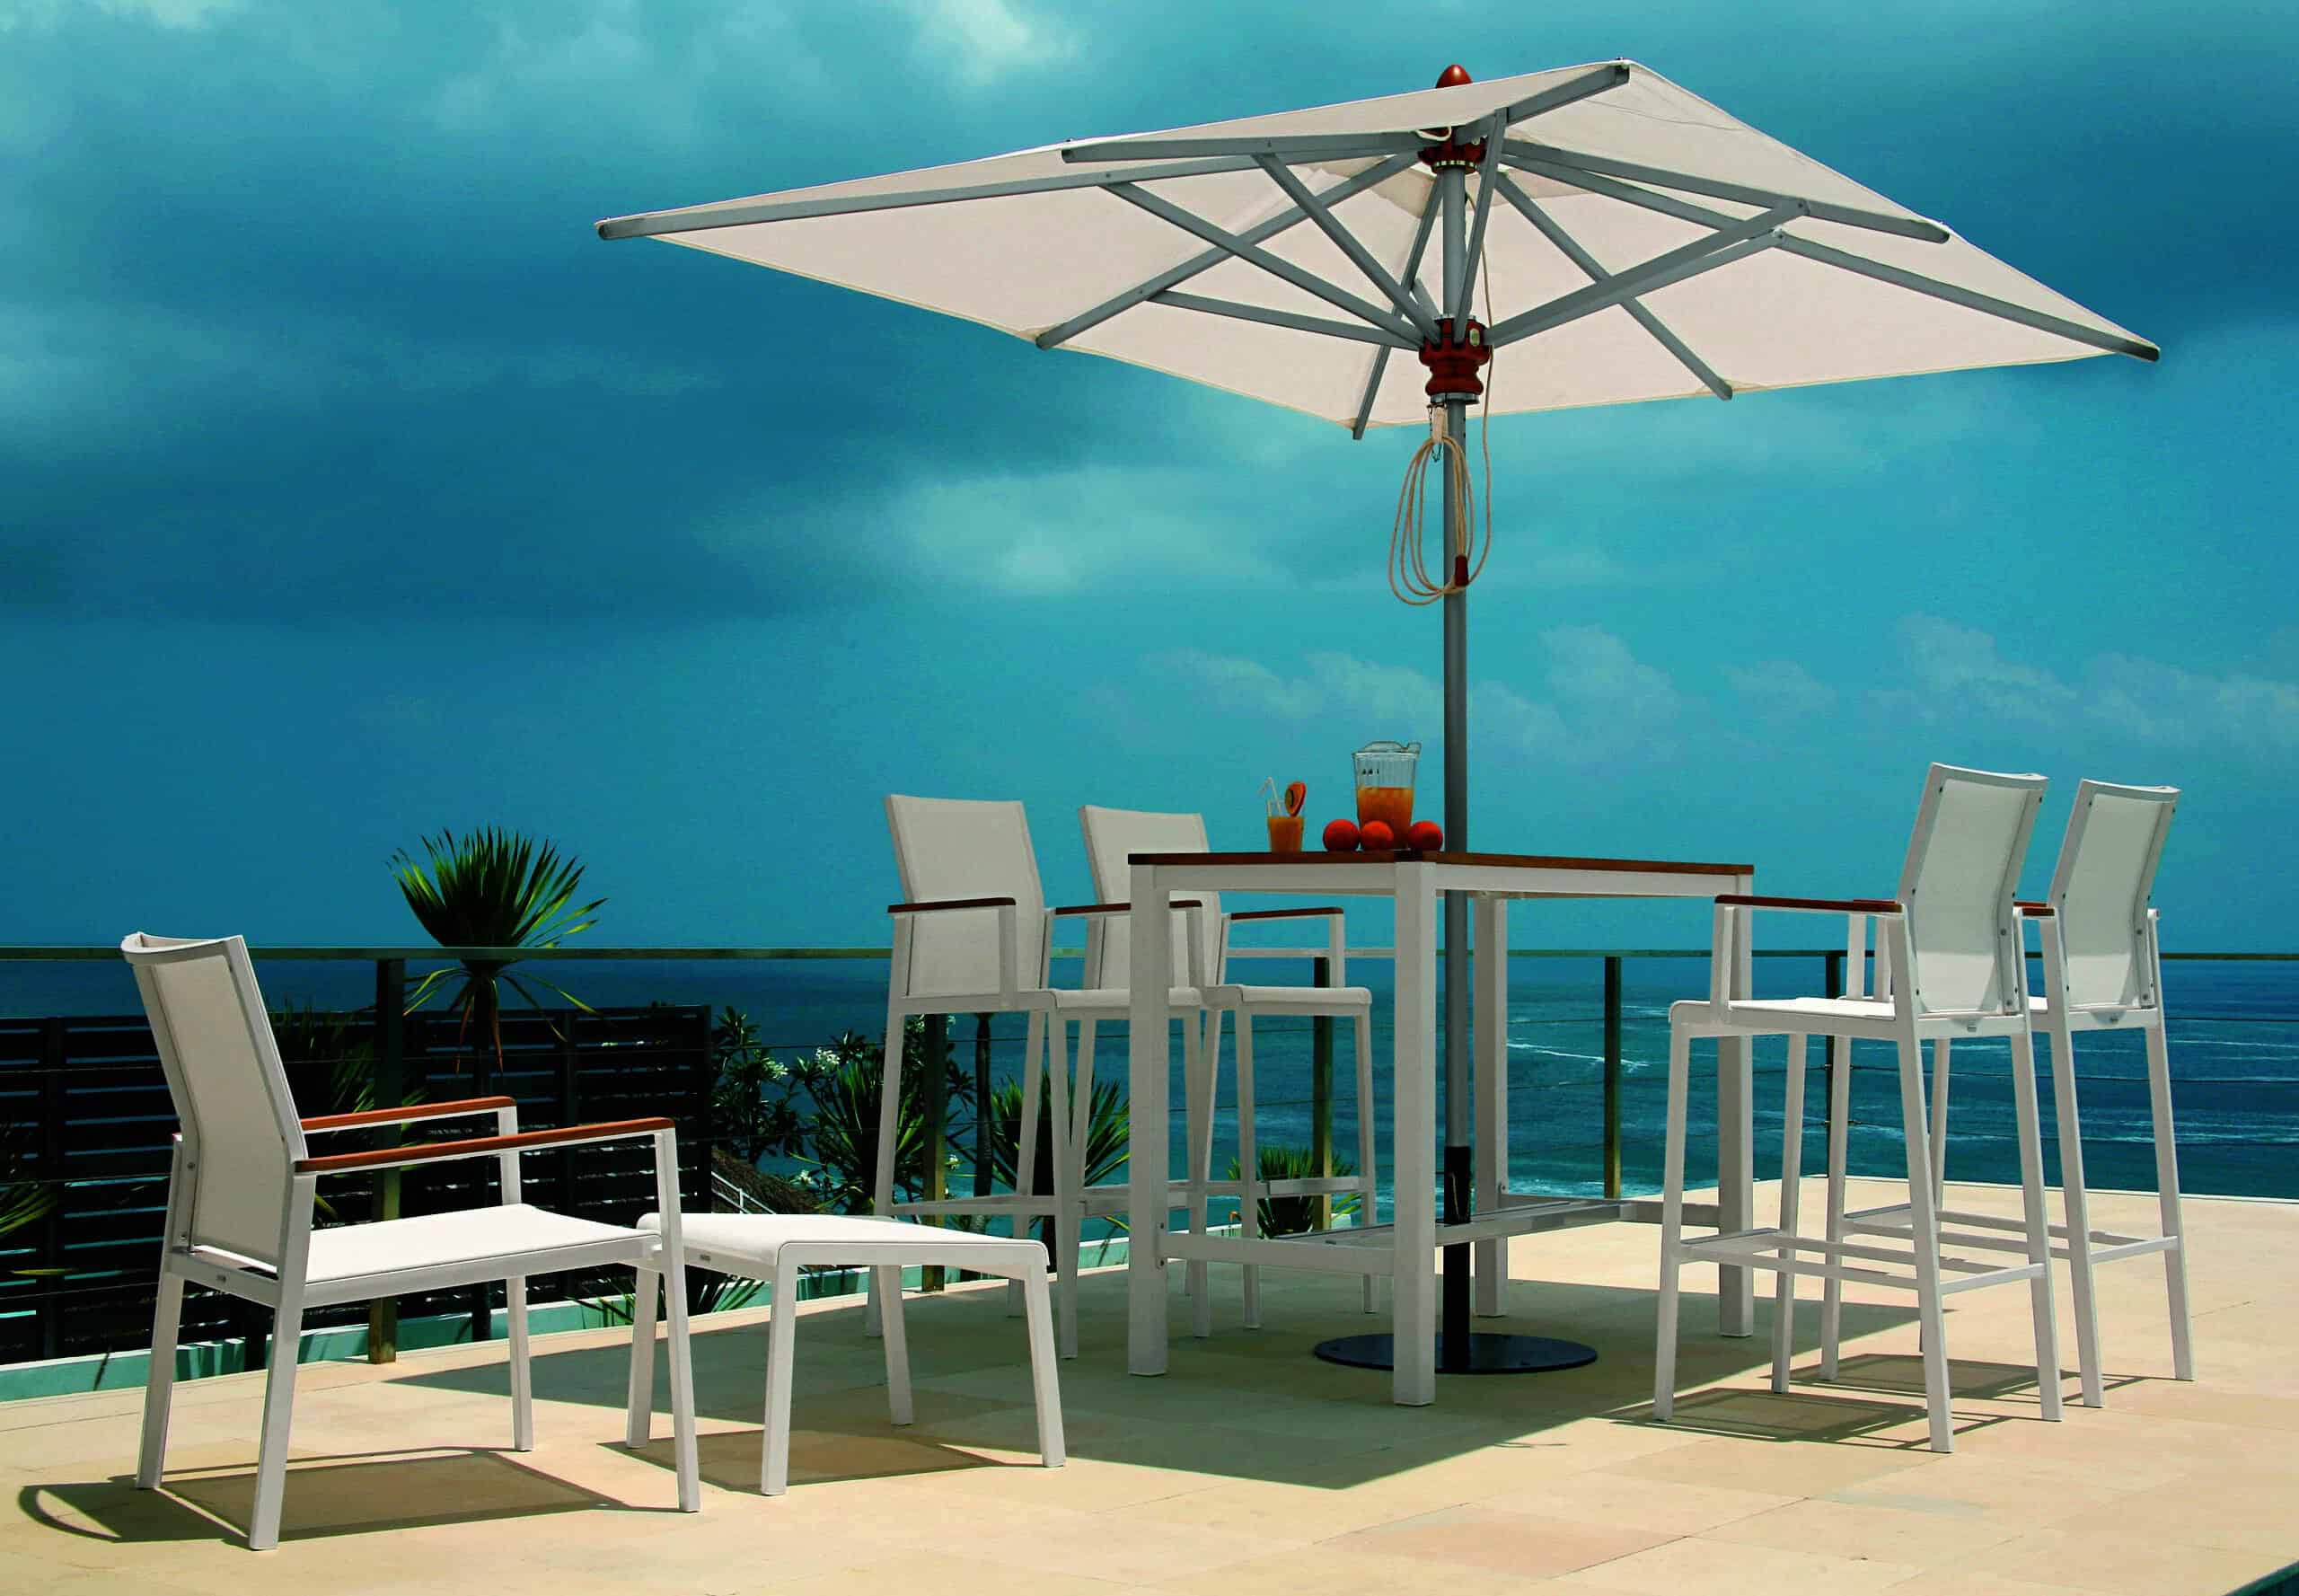 outdoor bar stools and table with umbrella overlooking a waterway background